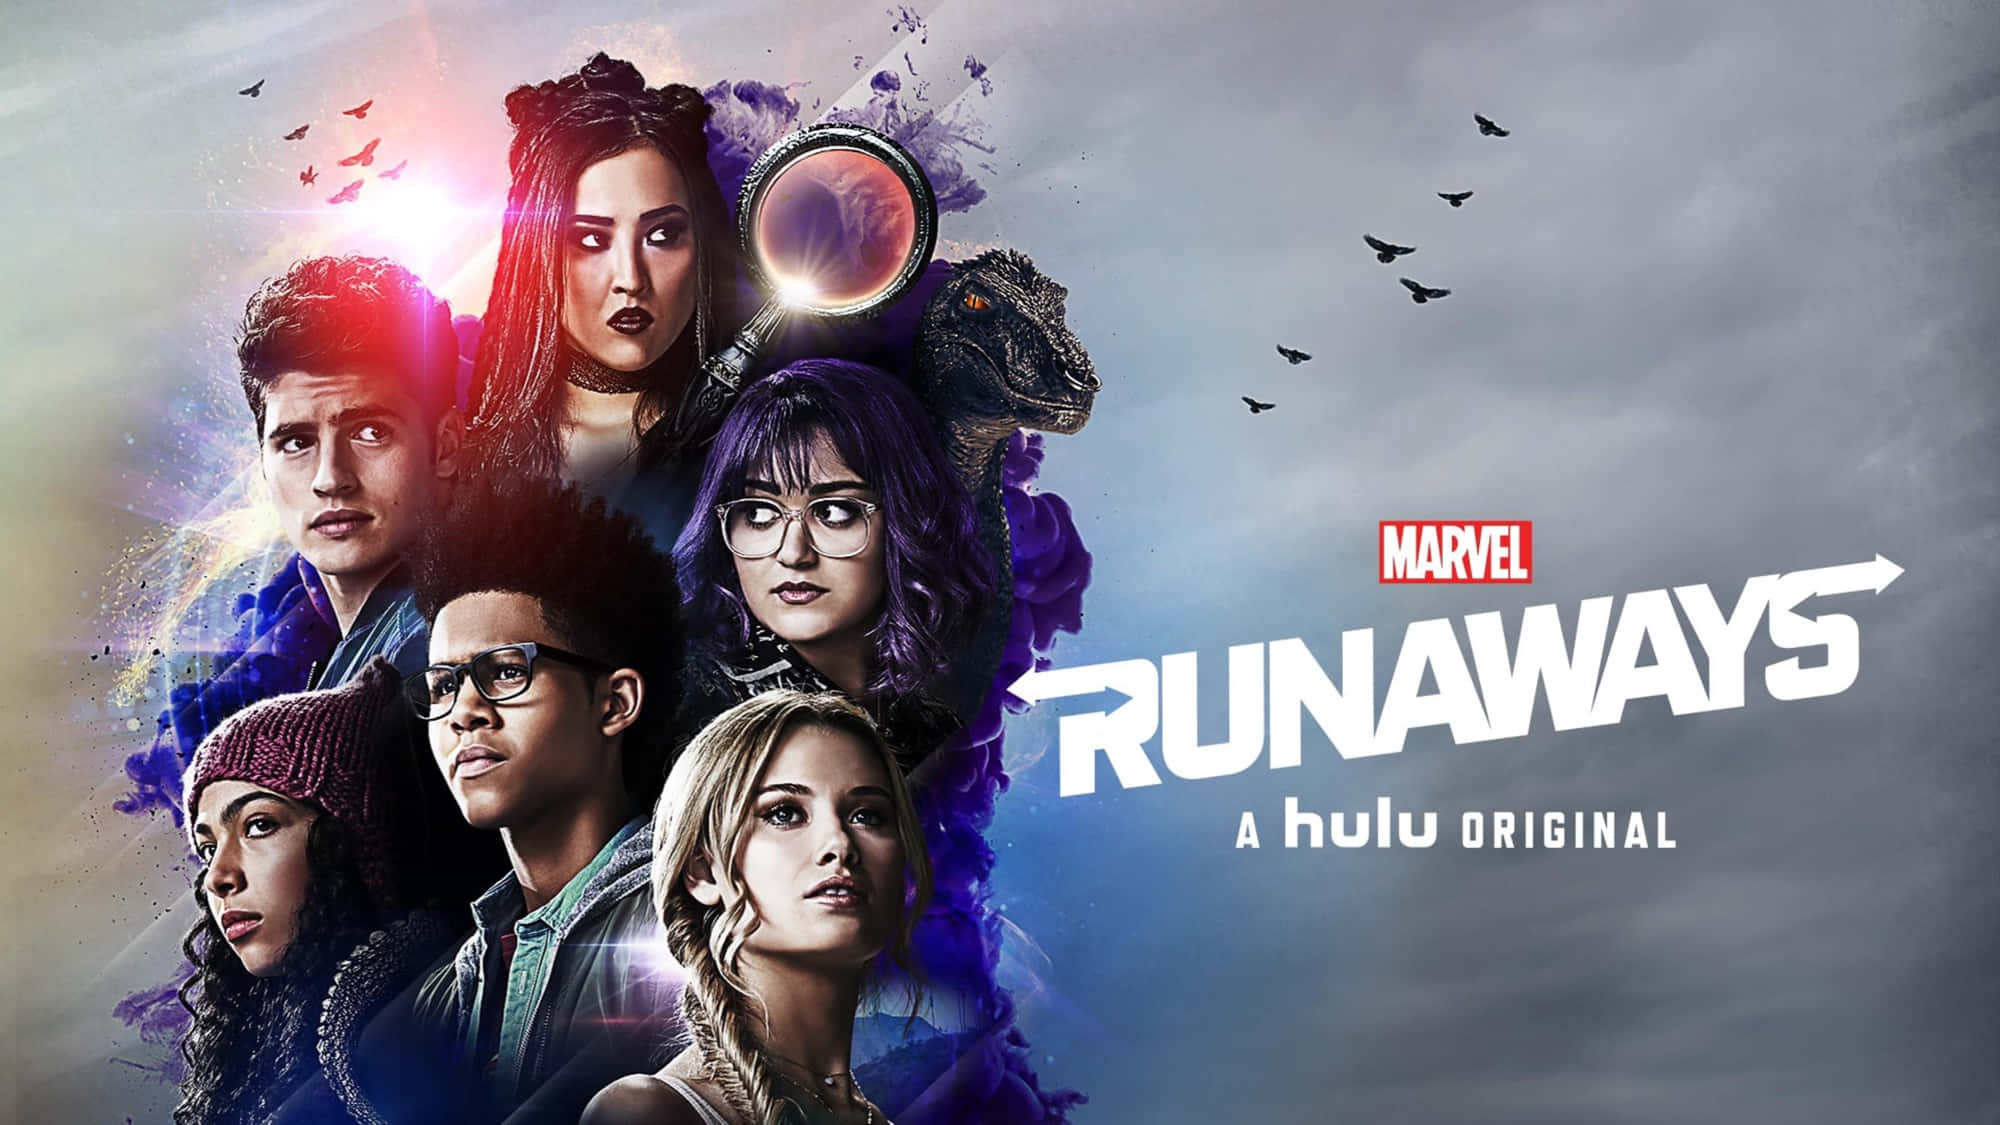 A group of powerful teenagers in Runaways with their supernatural abilities activated Wallpaper